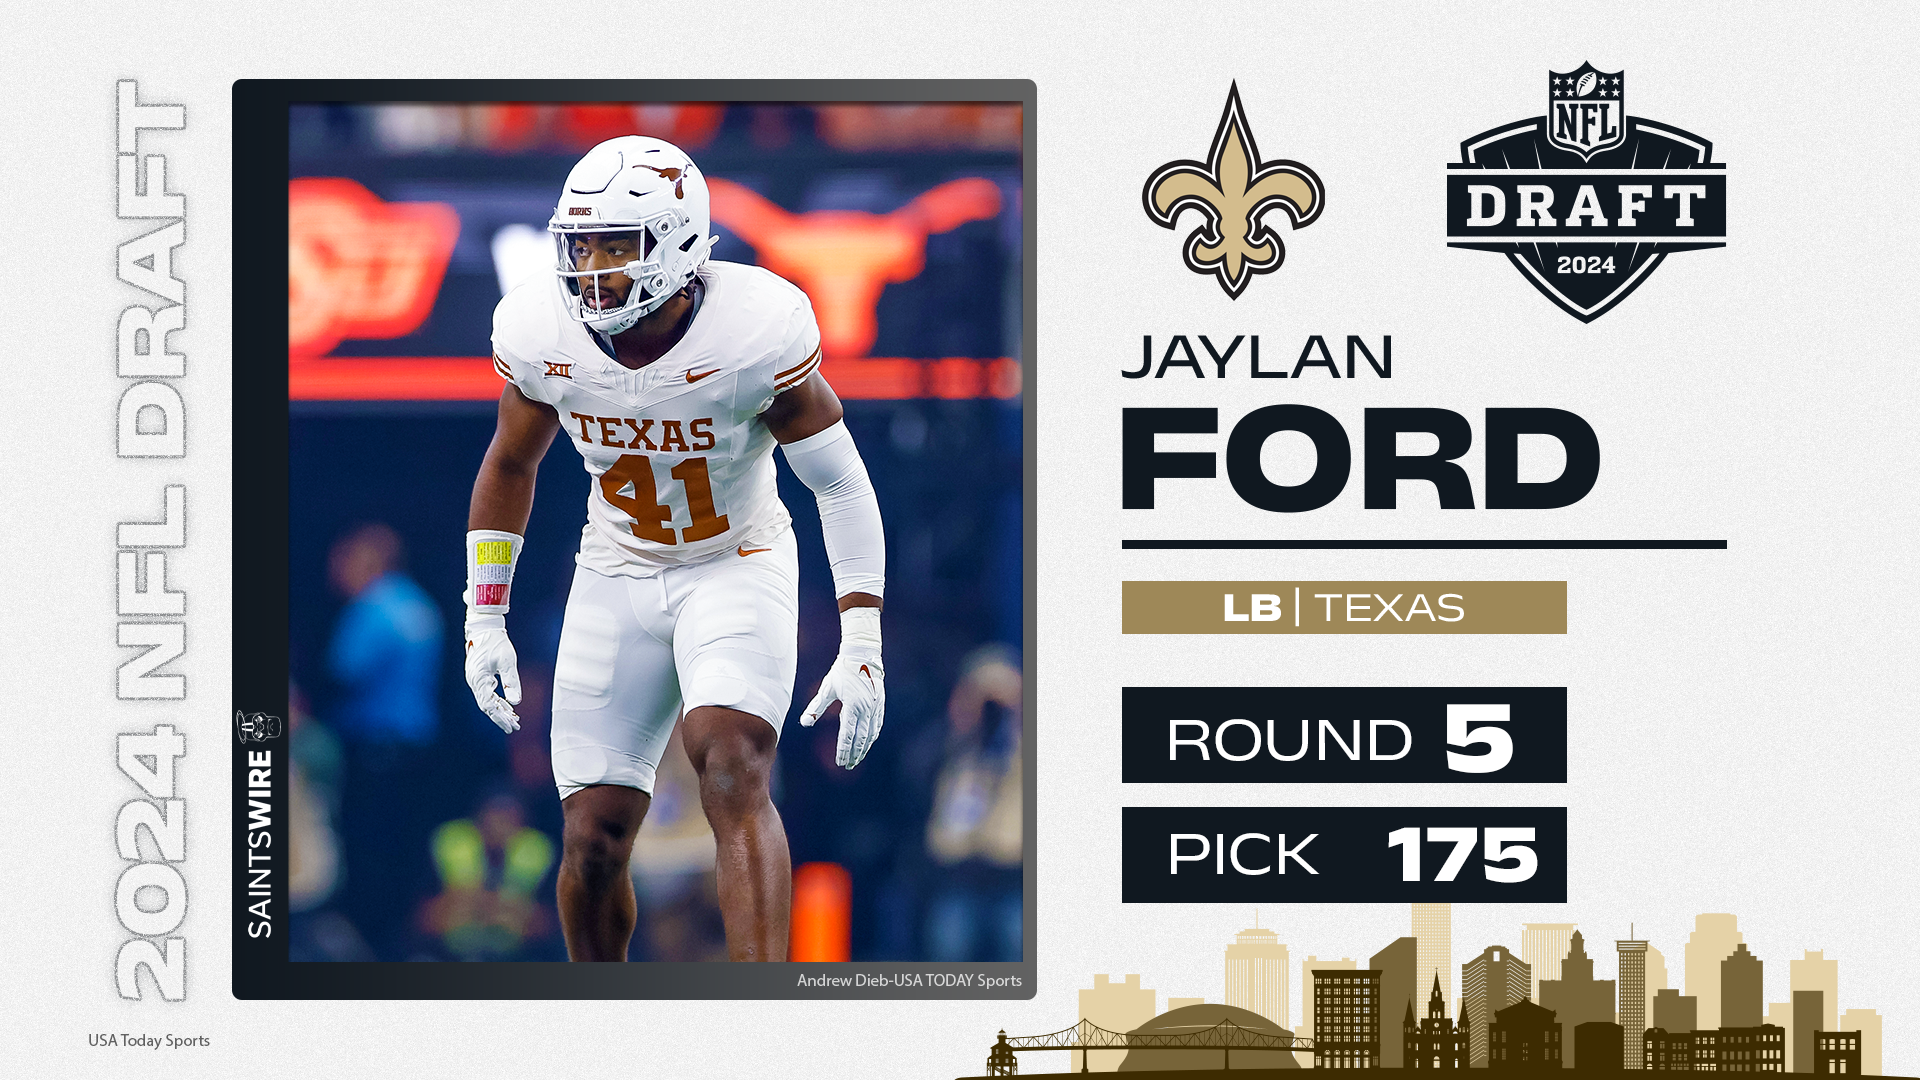 Countdown to Kickoff: Jaylan Ford is the Saints Player of Day 53